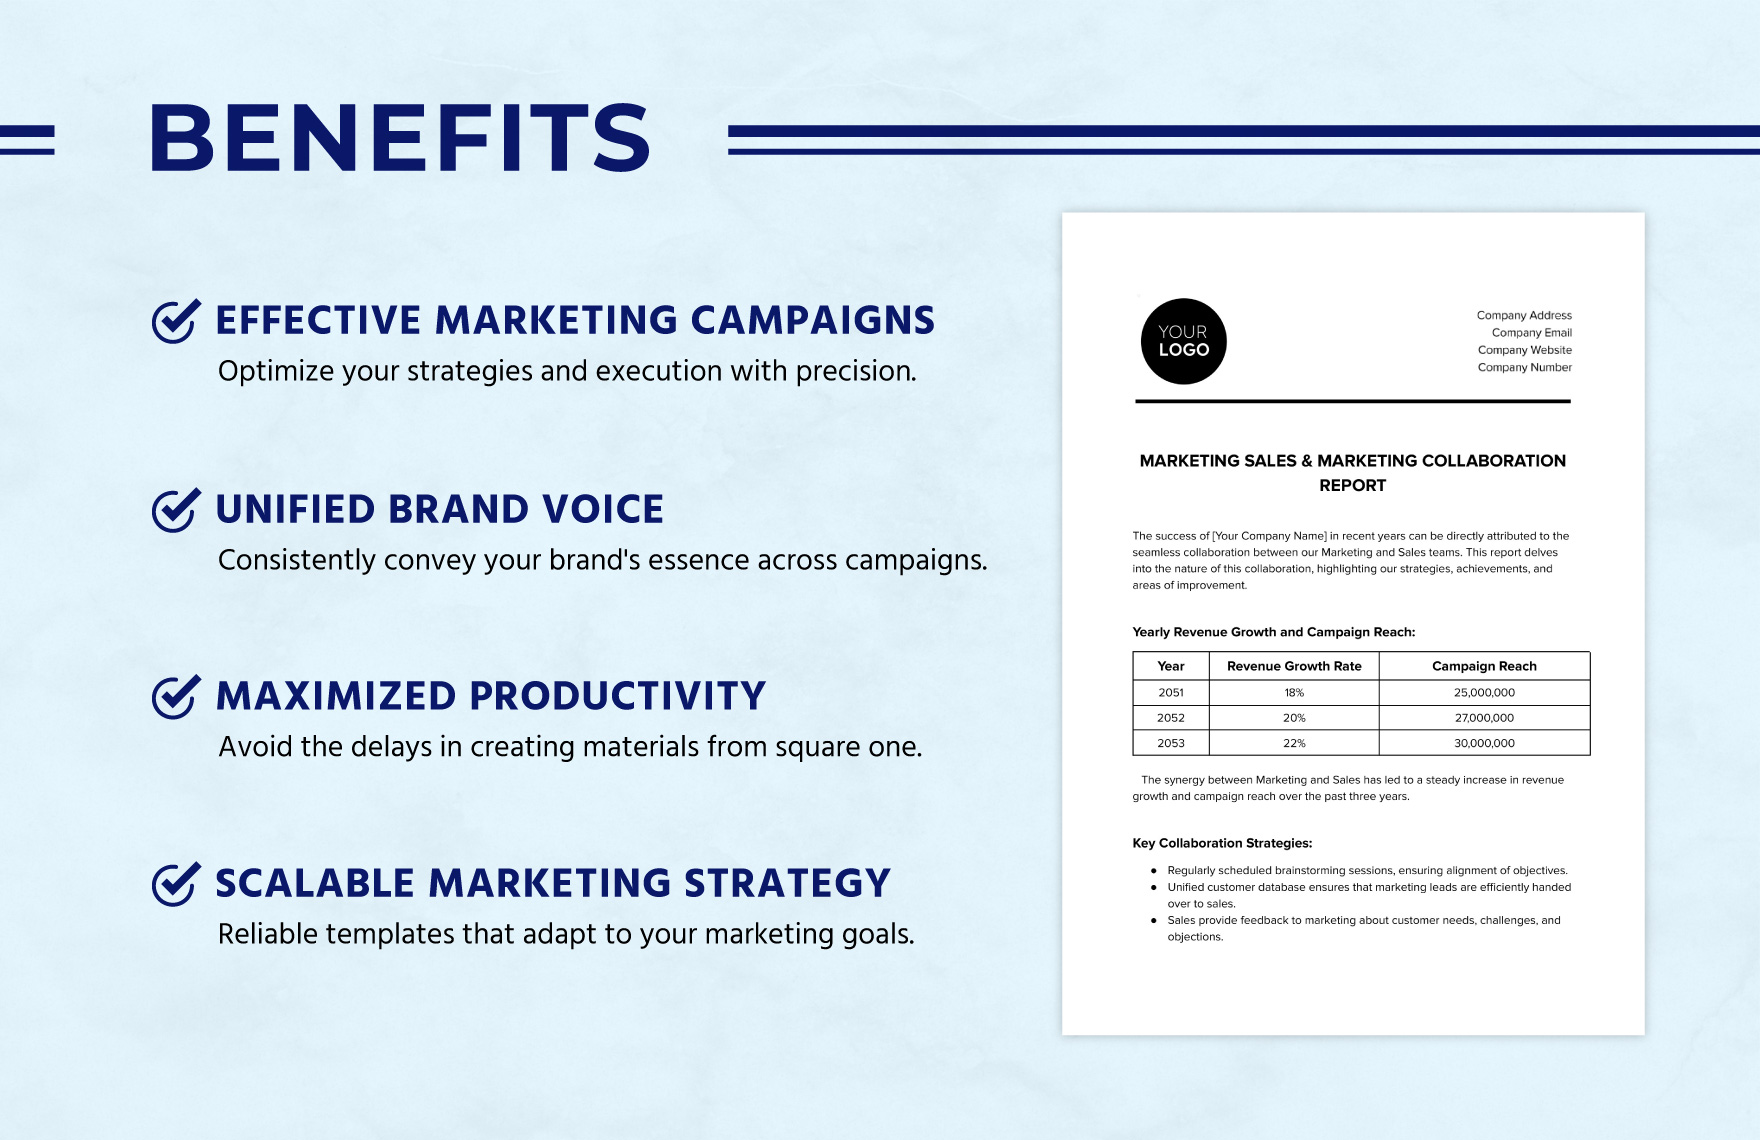 Marketing Sales & Marketing Collaboration Report Template